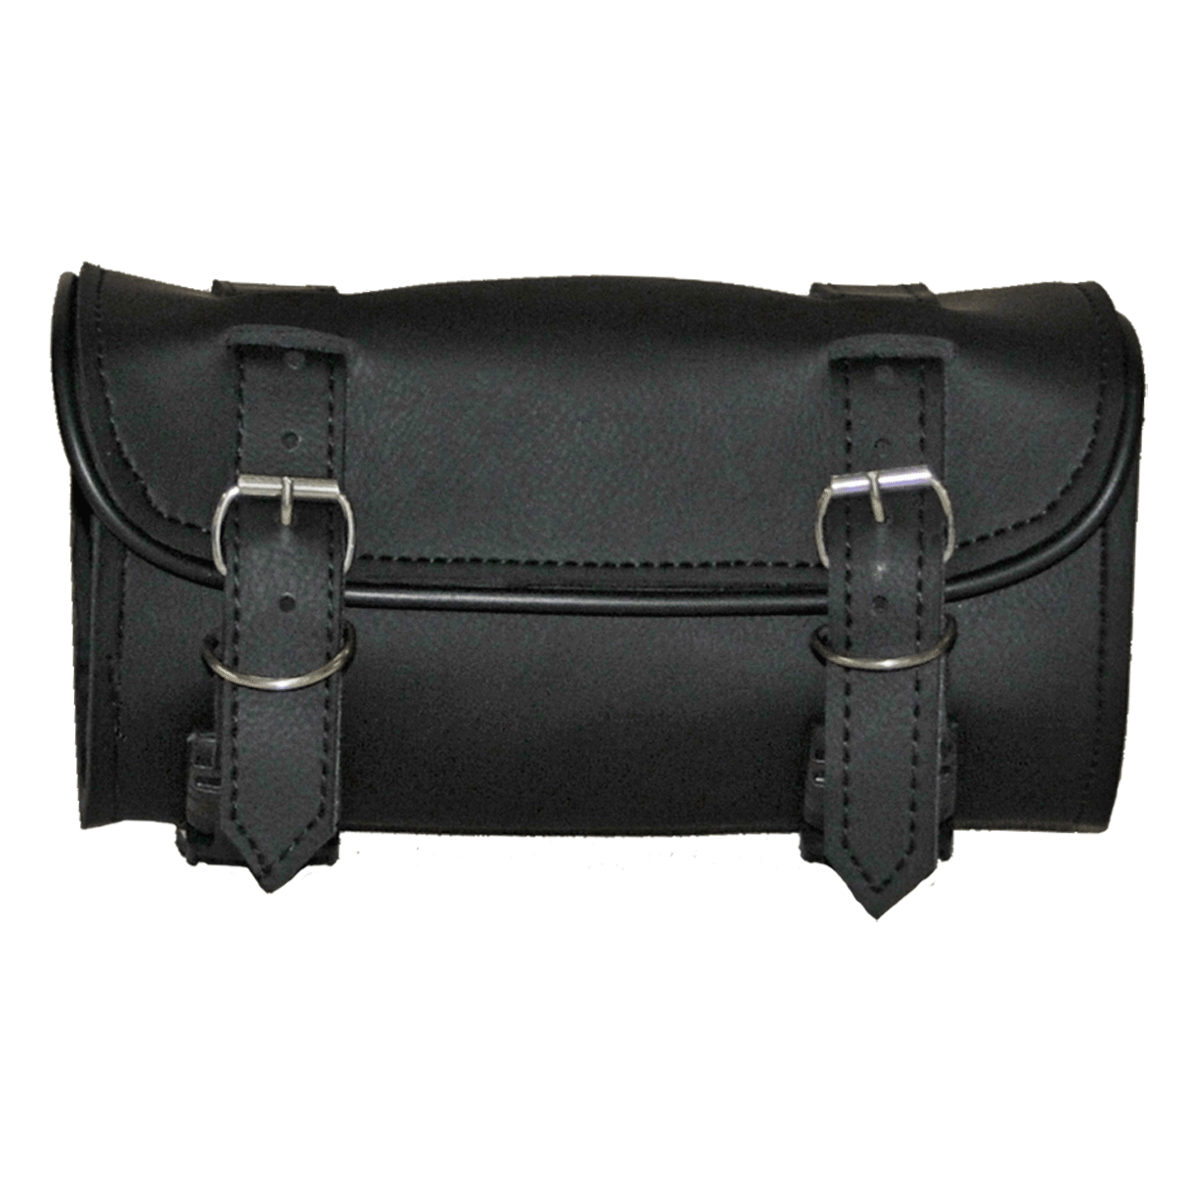 VS110 2 Strap Plain Tool Bag with Quick Releases